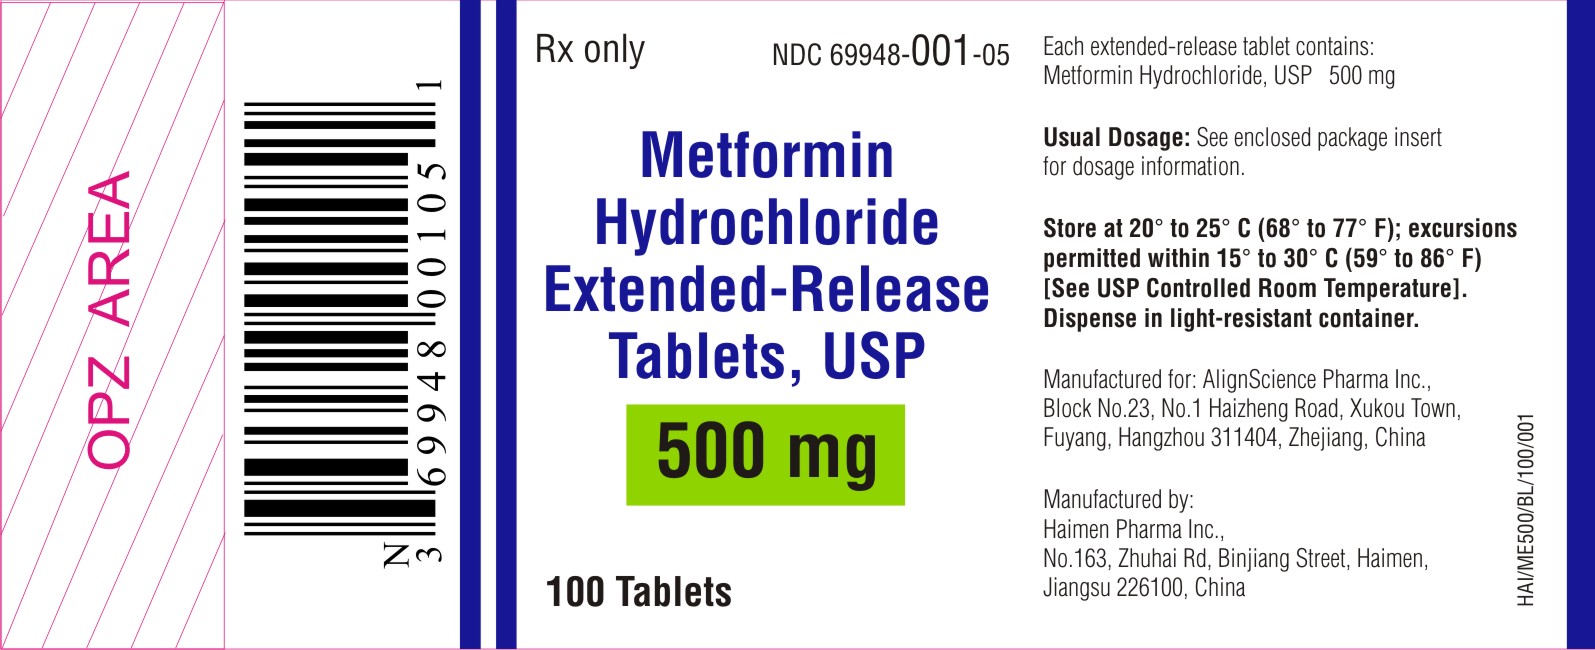 METFORMIN HYDROCHLORIDE EXTENDED-RELEASE TABLETS - 500 mg